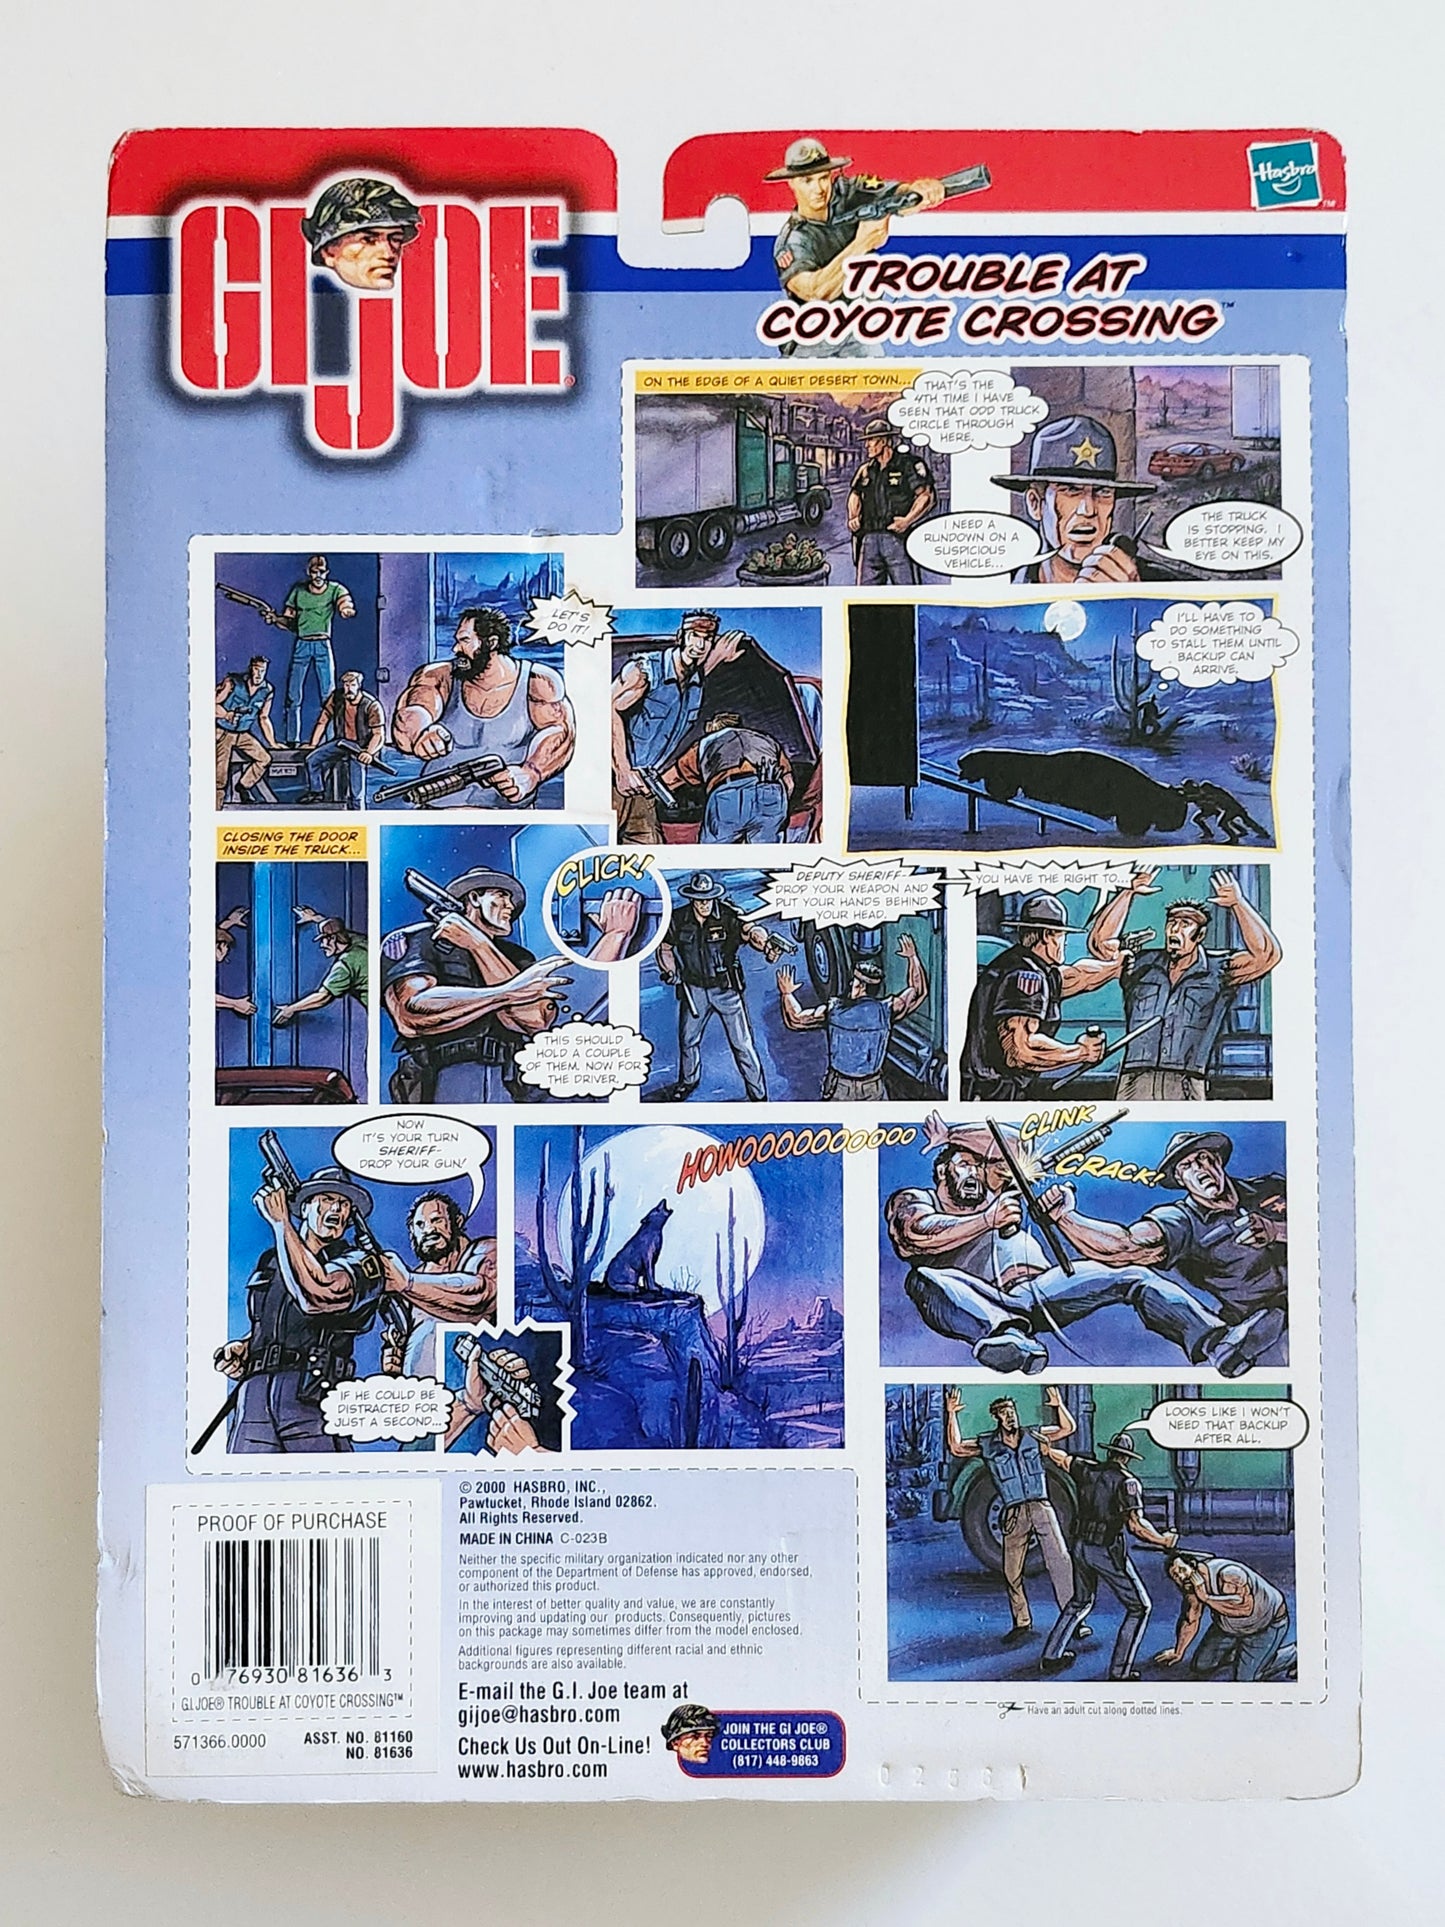 Adventures of G.I. Joe Trouble at Coyote Crossing (African-American) 12-Inch Action Figure